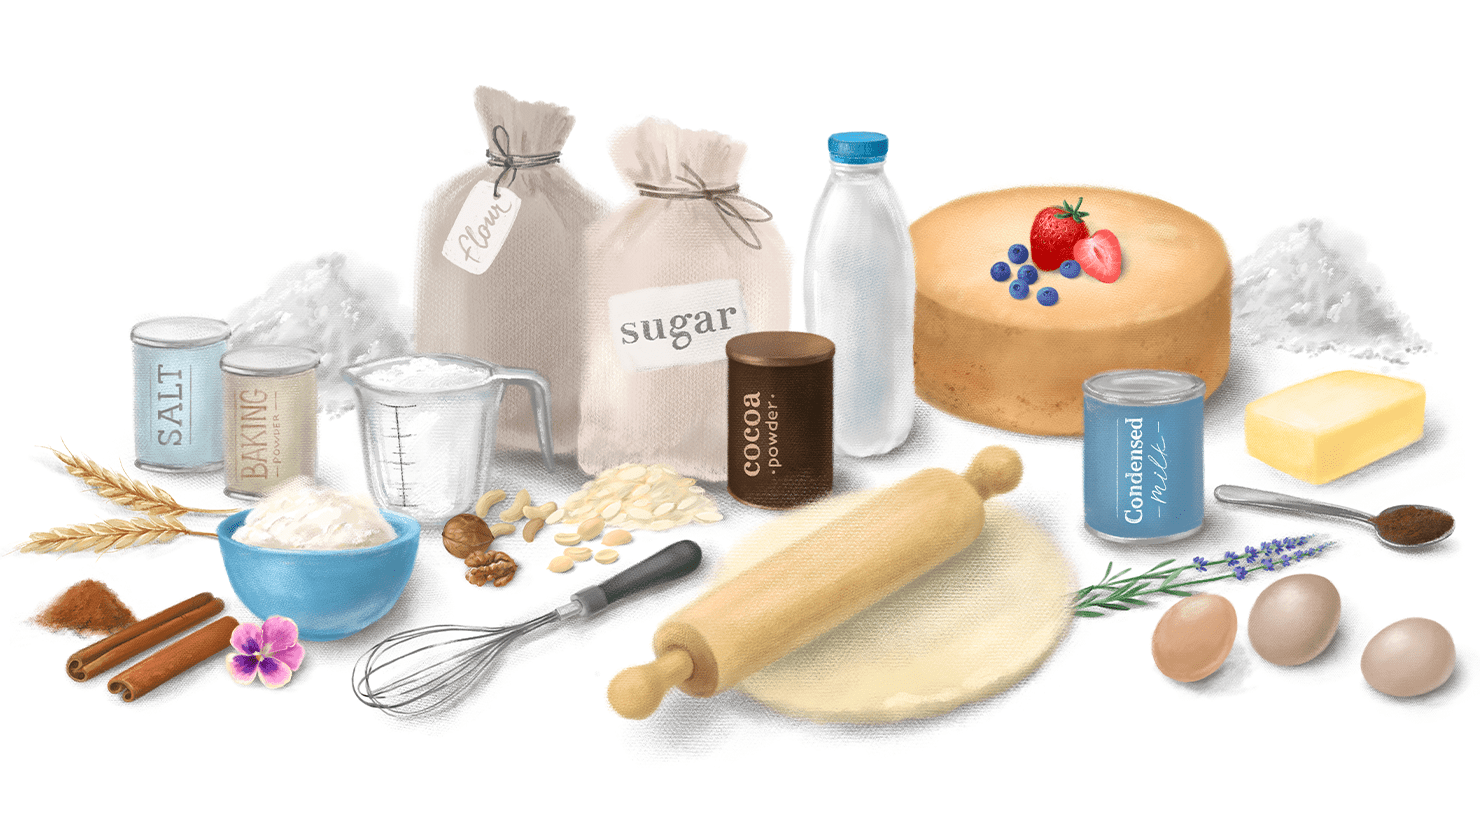 Which cake should you bake next?